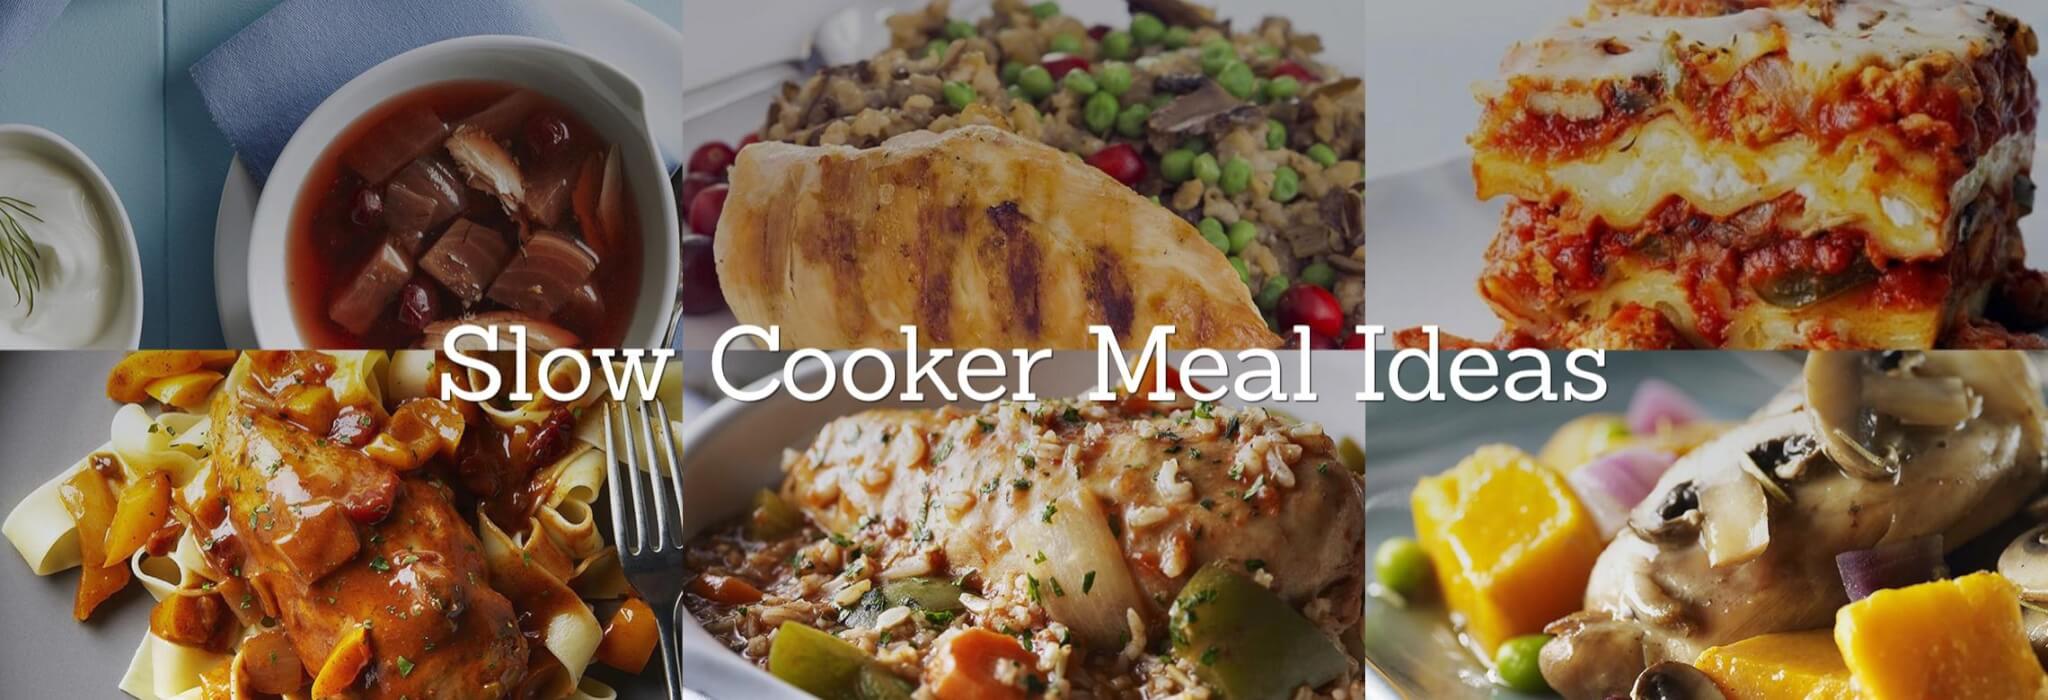 Slow Cooker Meal Ideas